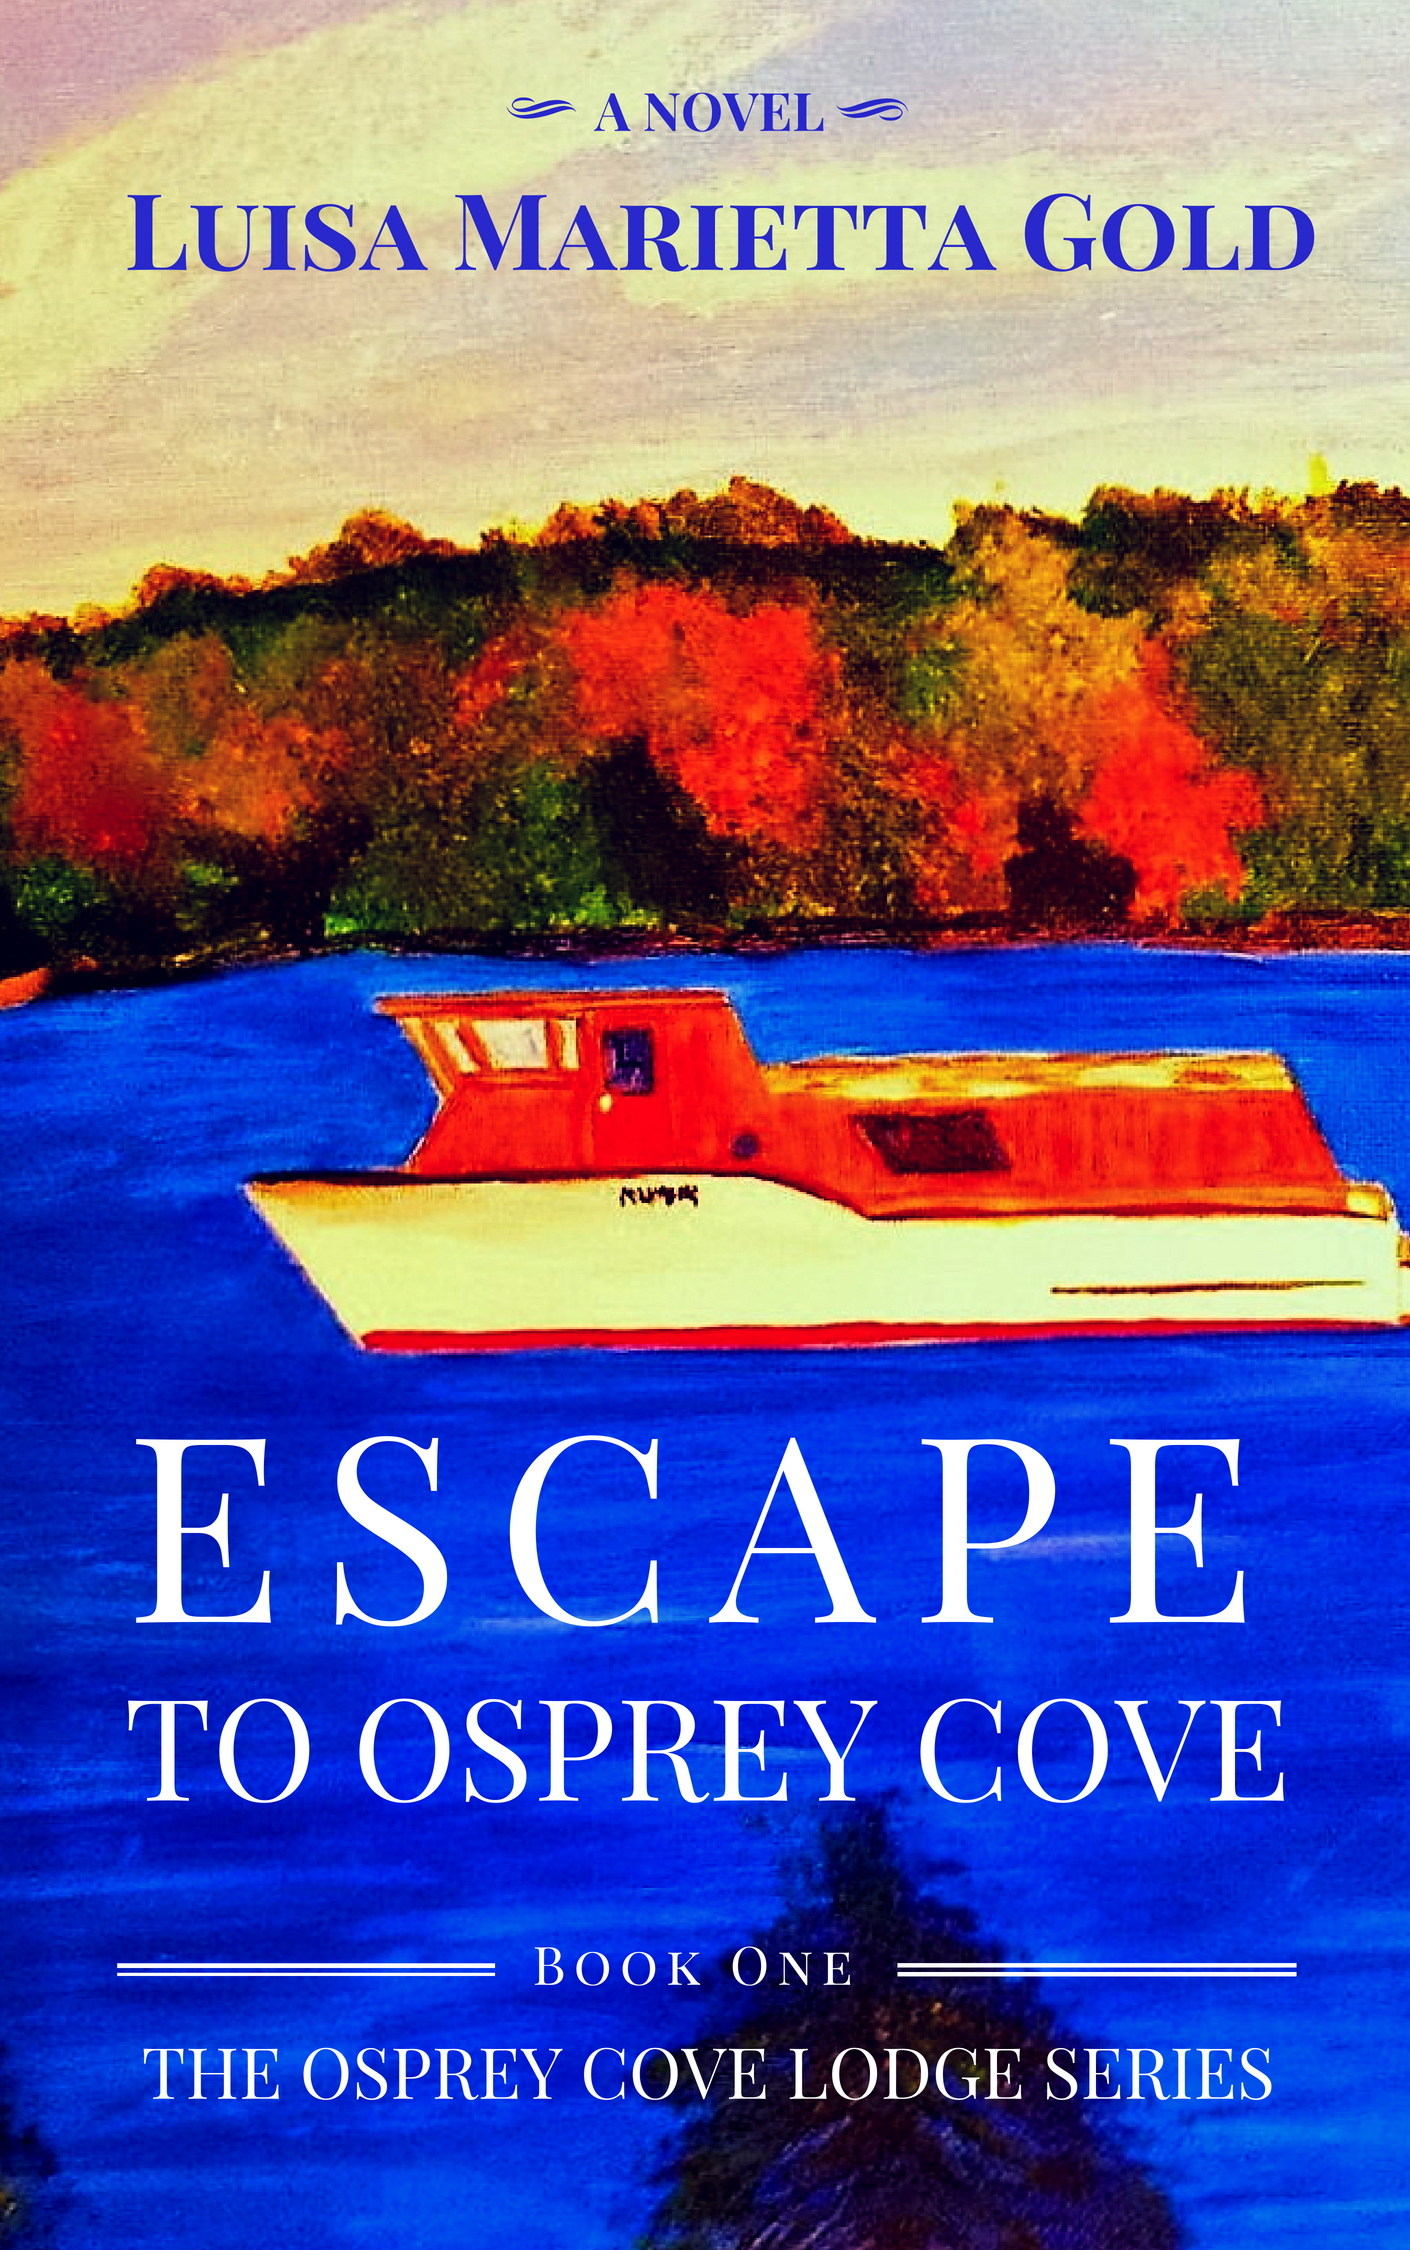 FREE: Escape to Osprey Cove by Luisa Marietta Gold